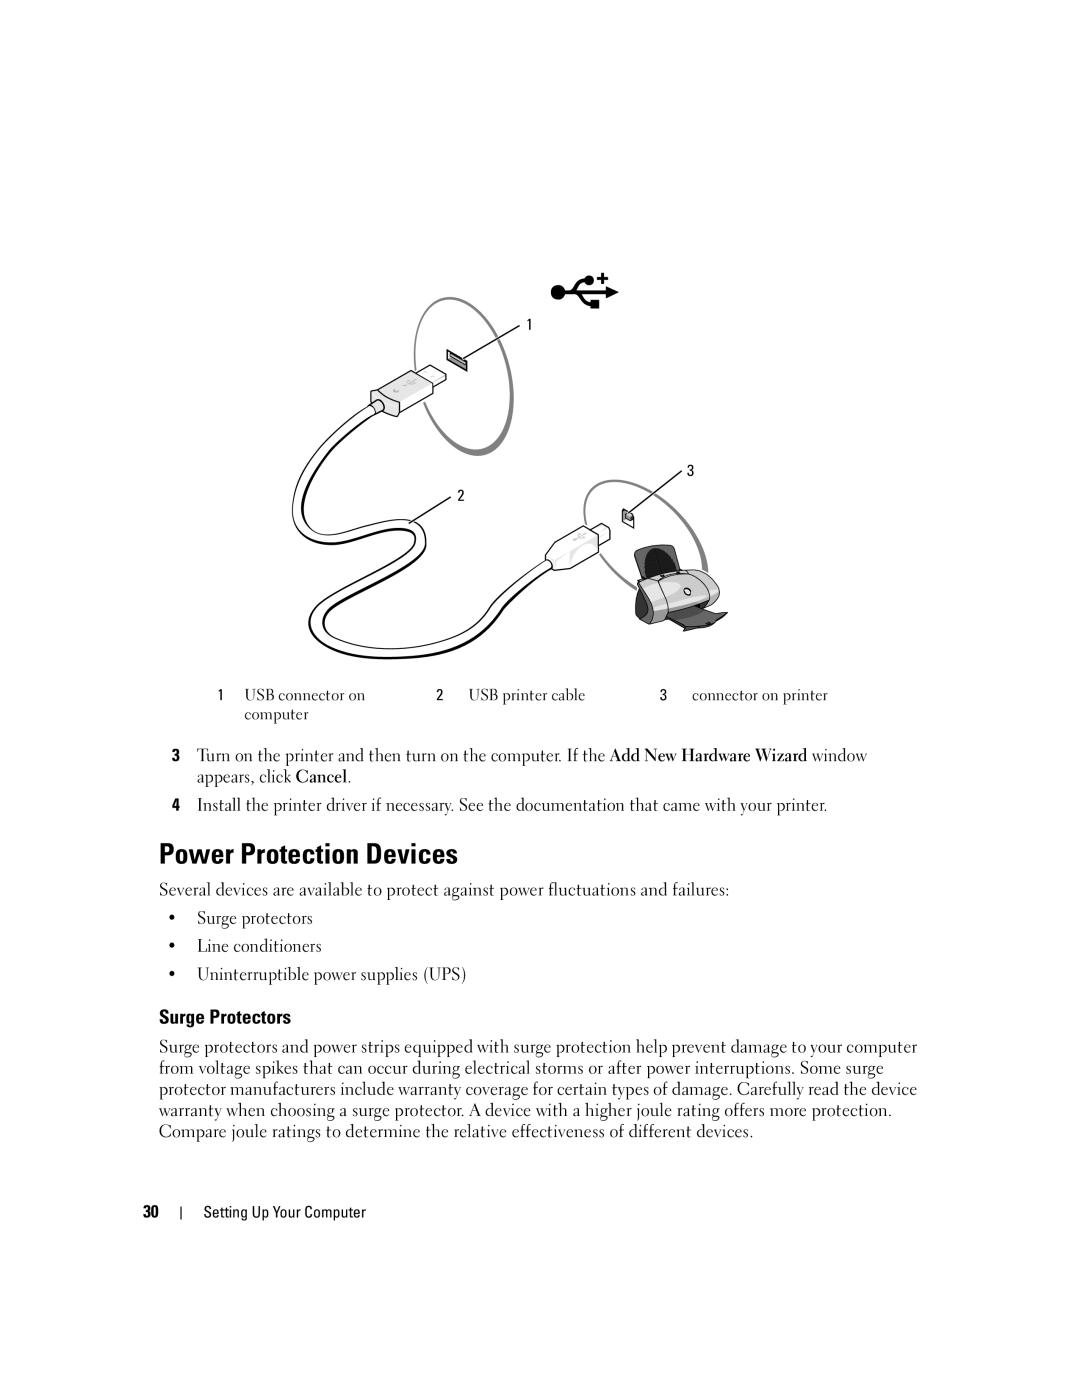 Dell 1501 owner manual Power Protection Devices, Surge Protectors 